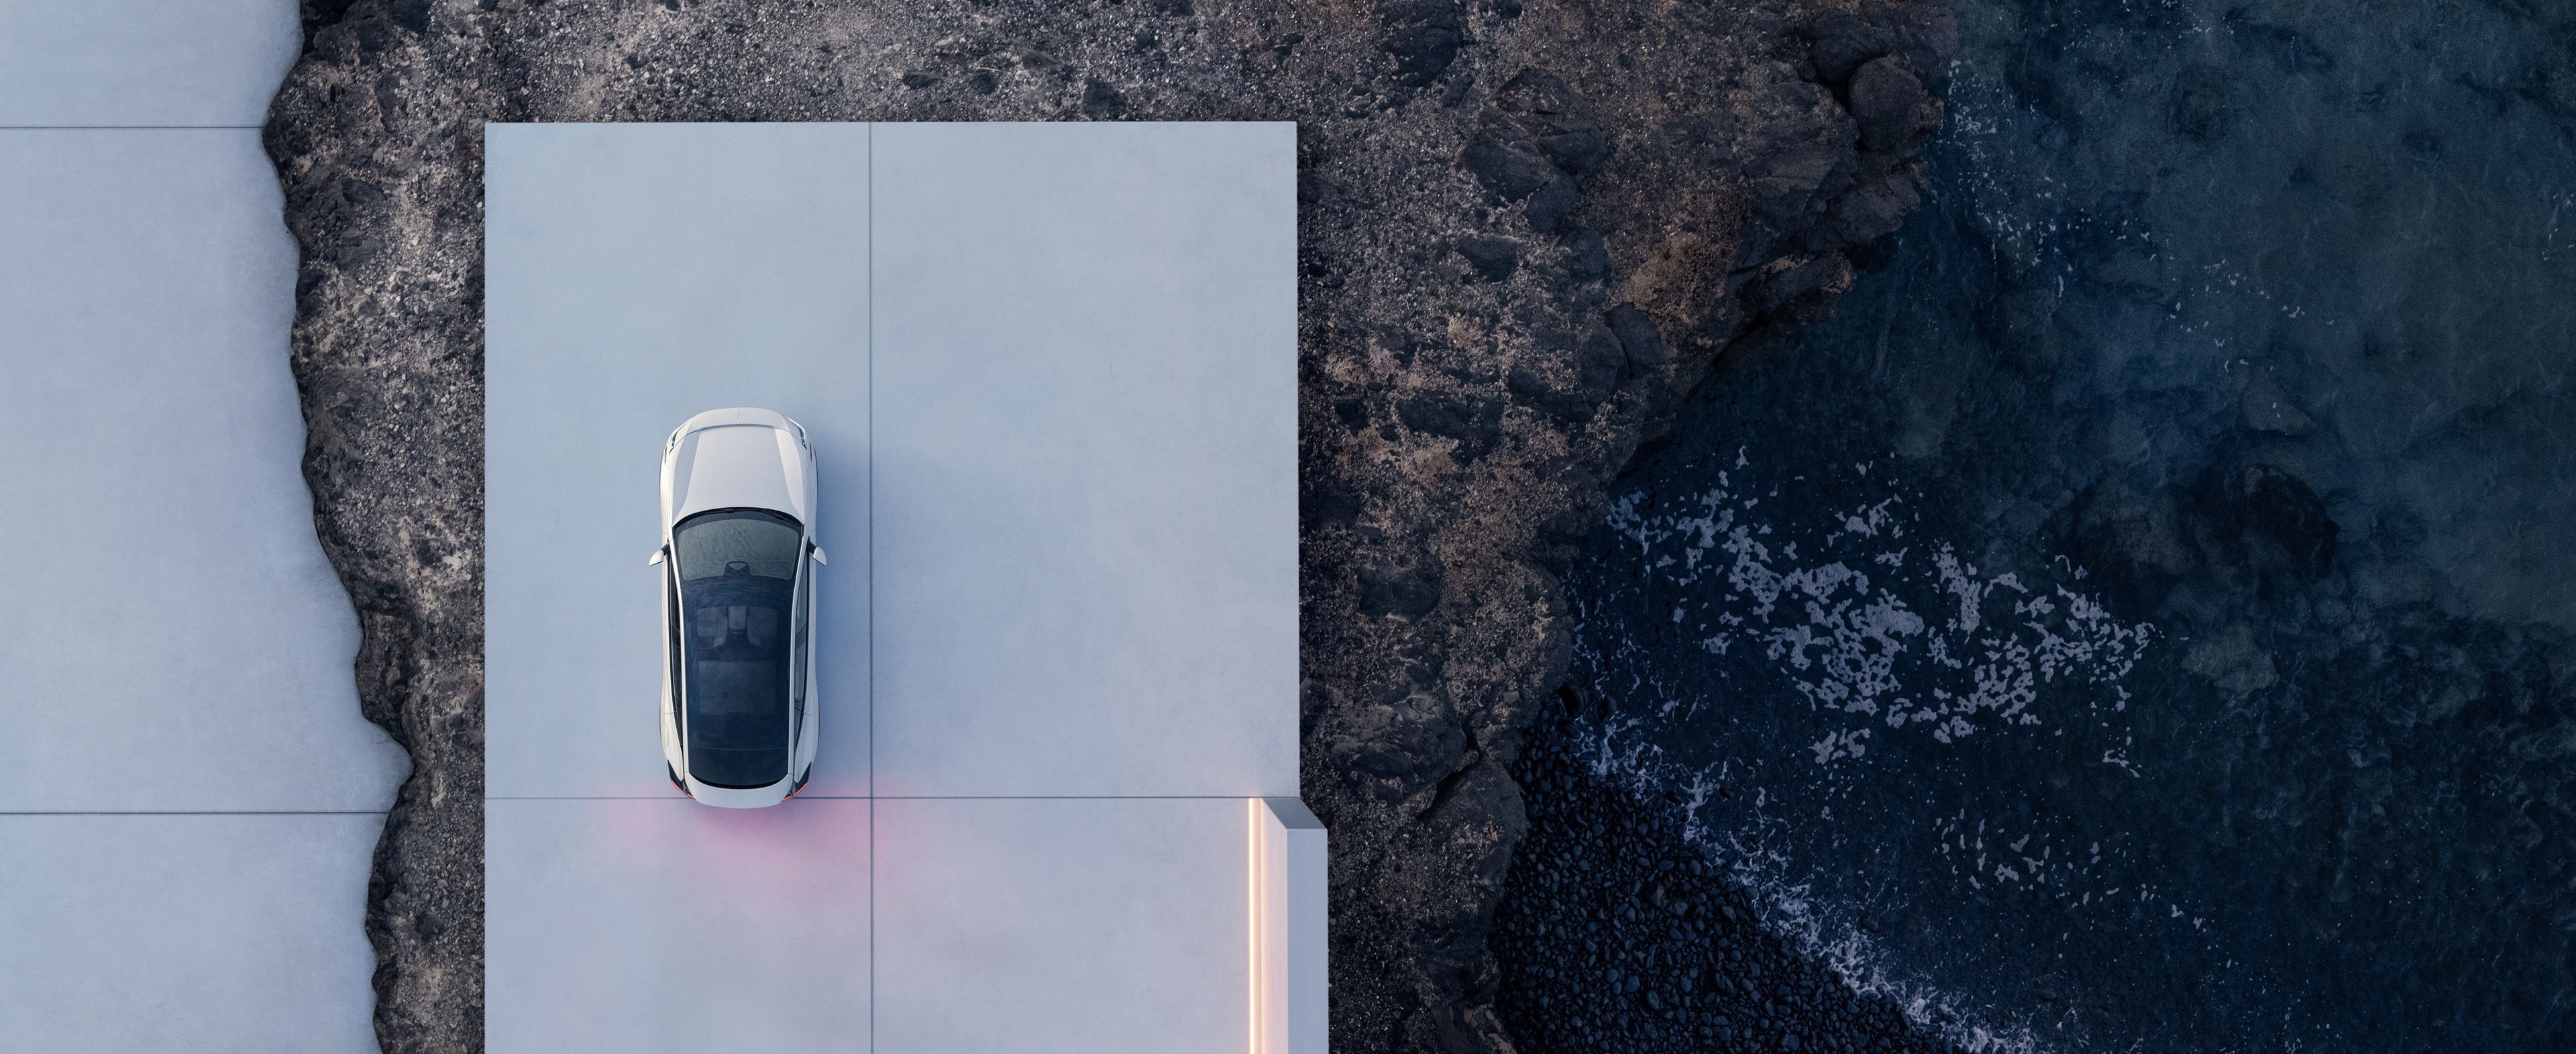 Polestar reduces relative greenhouse gas emissions by 9% per sold car and discloses 2040 climate roadmap